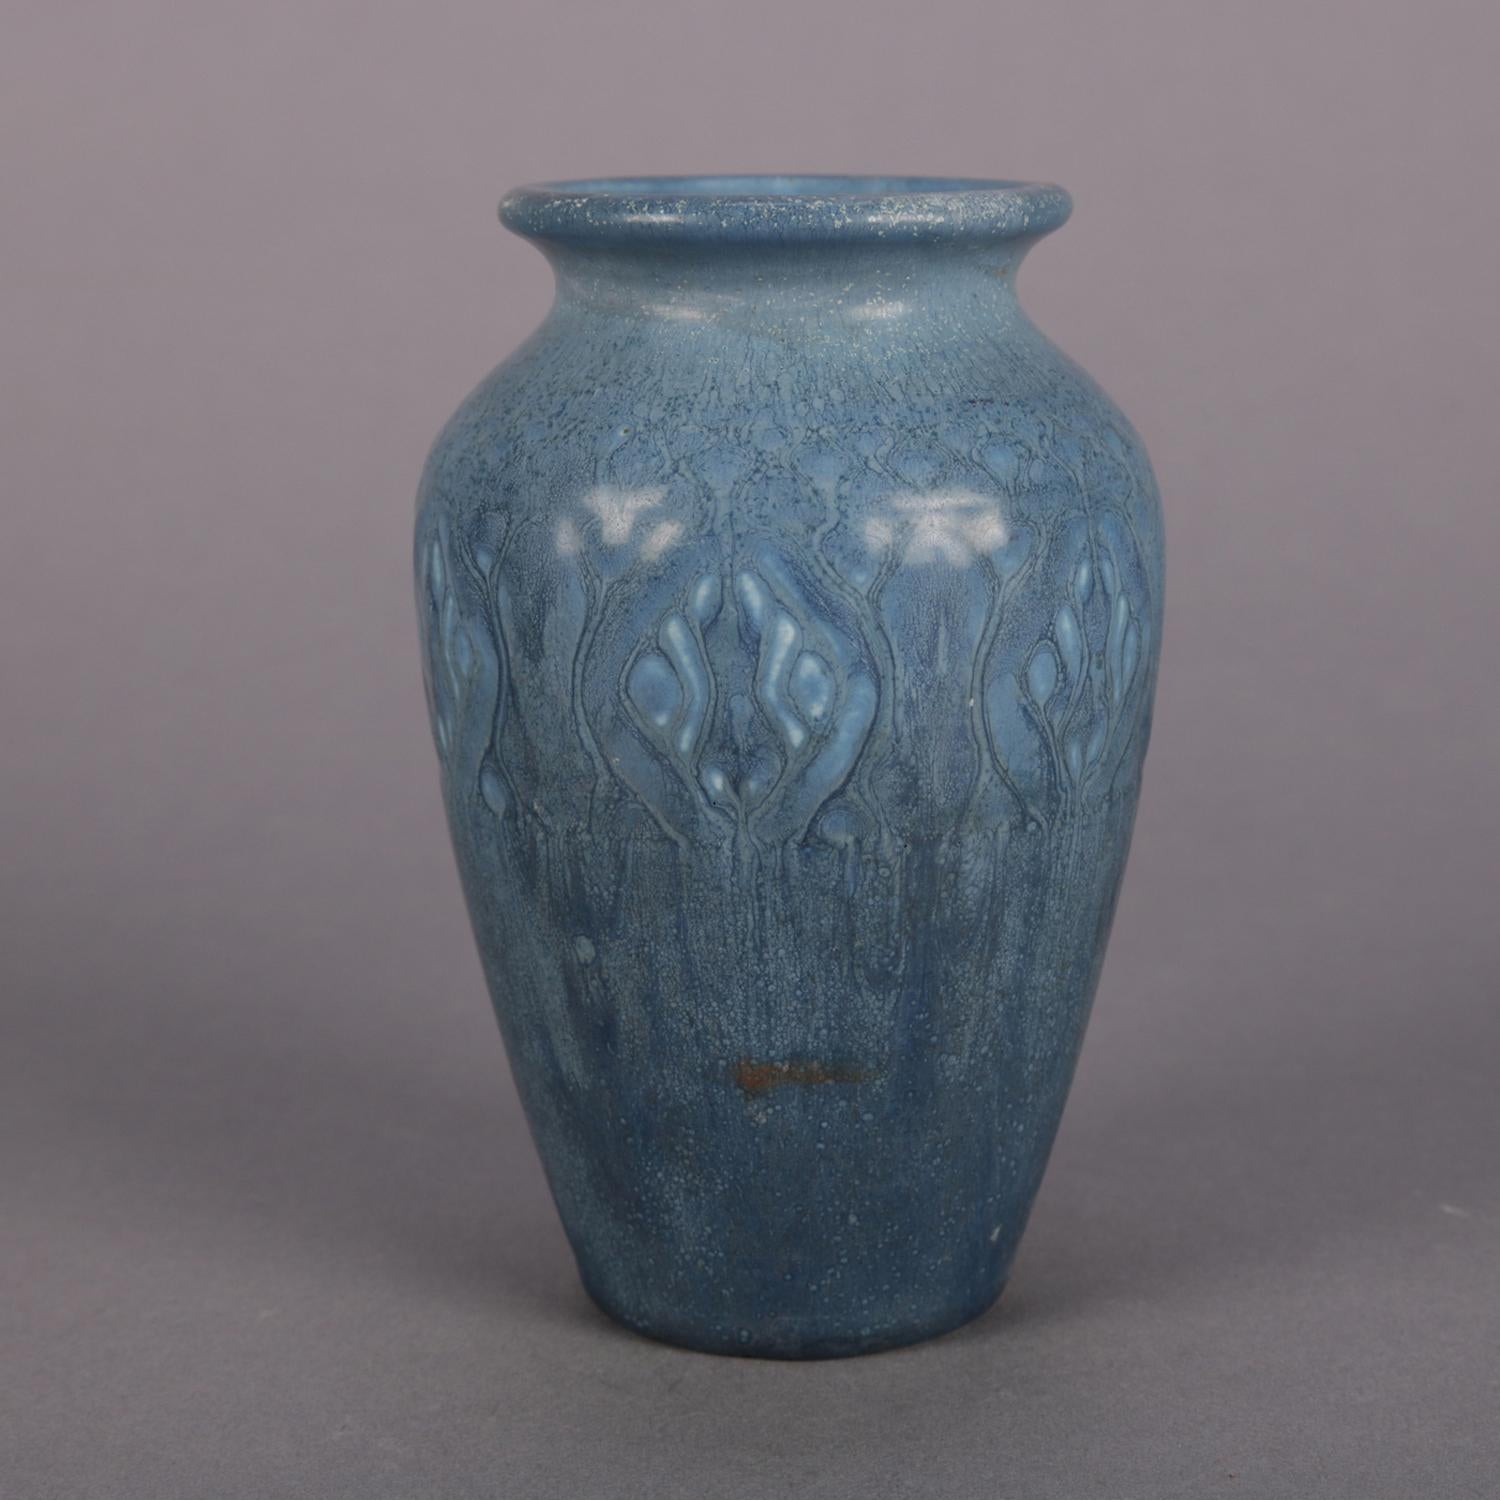 Antique Arts & Crafts art pottery vase by Rookwood Pottery features petite open urn form with stylized foliate glaze design in blues, marked on base, circa 1921.

Measures: 5